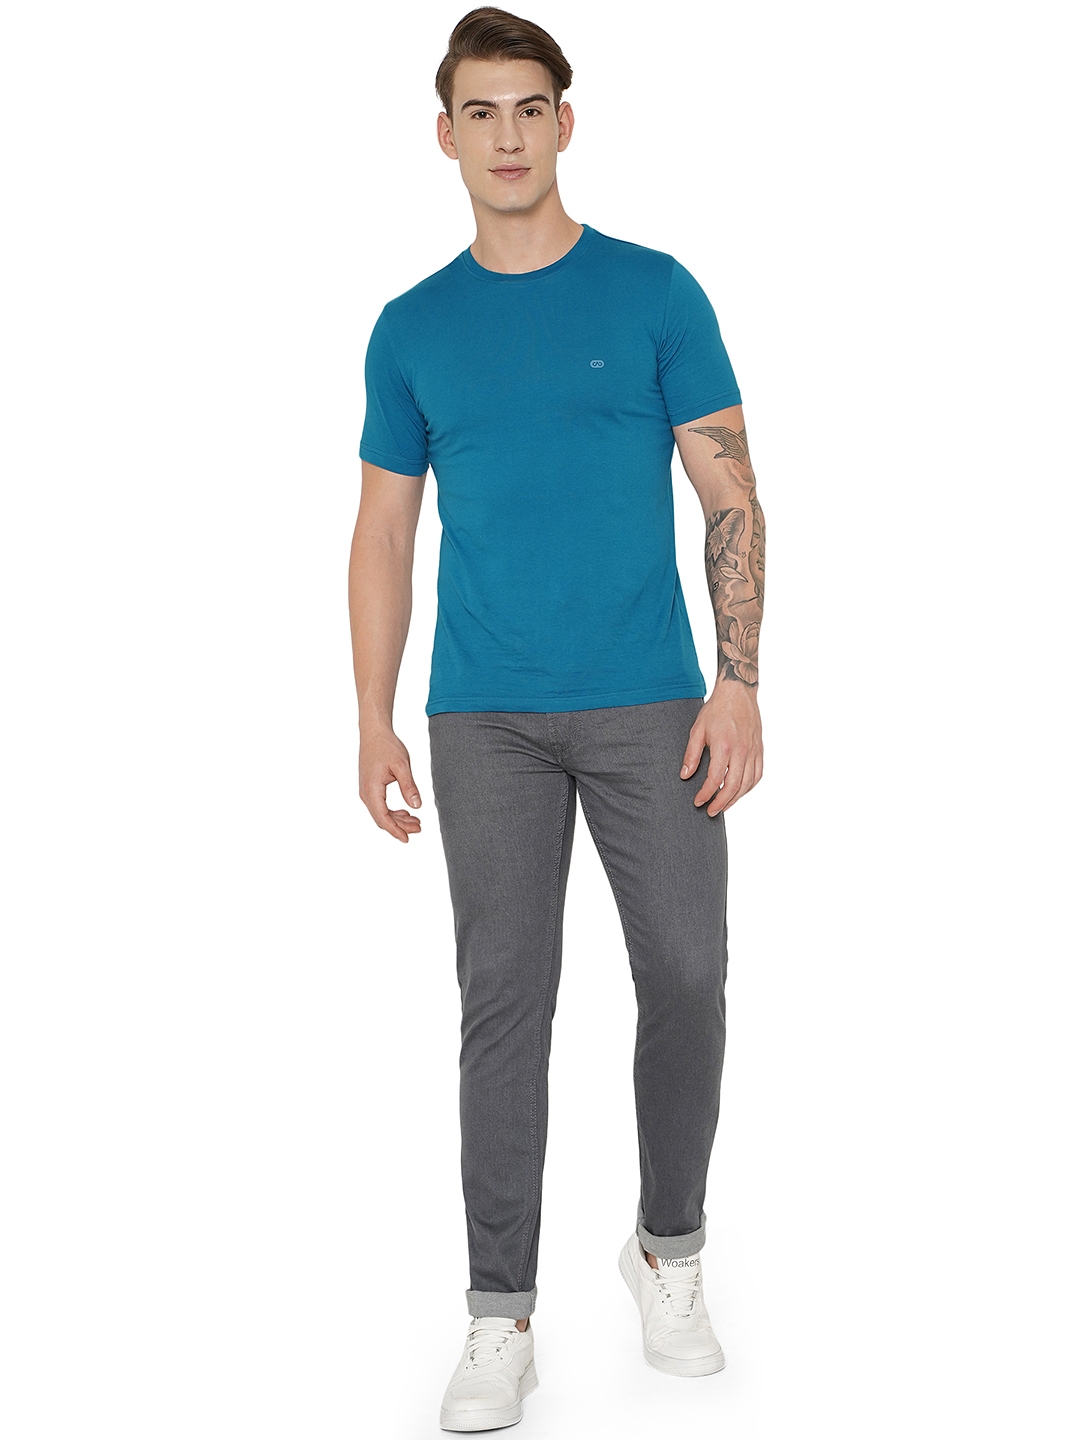 Steel Grey Washed Narrow Fit Jeans | Greenfibre